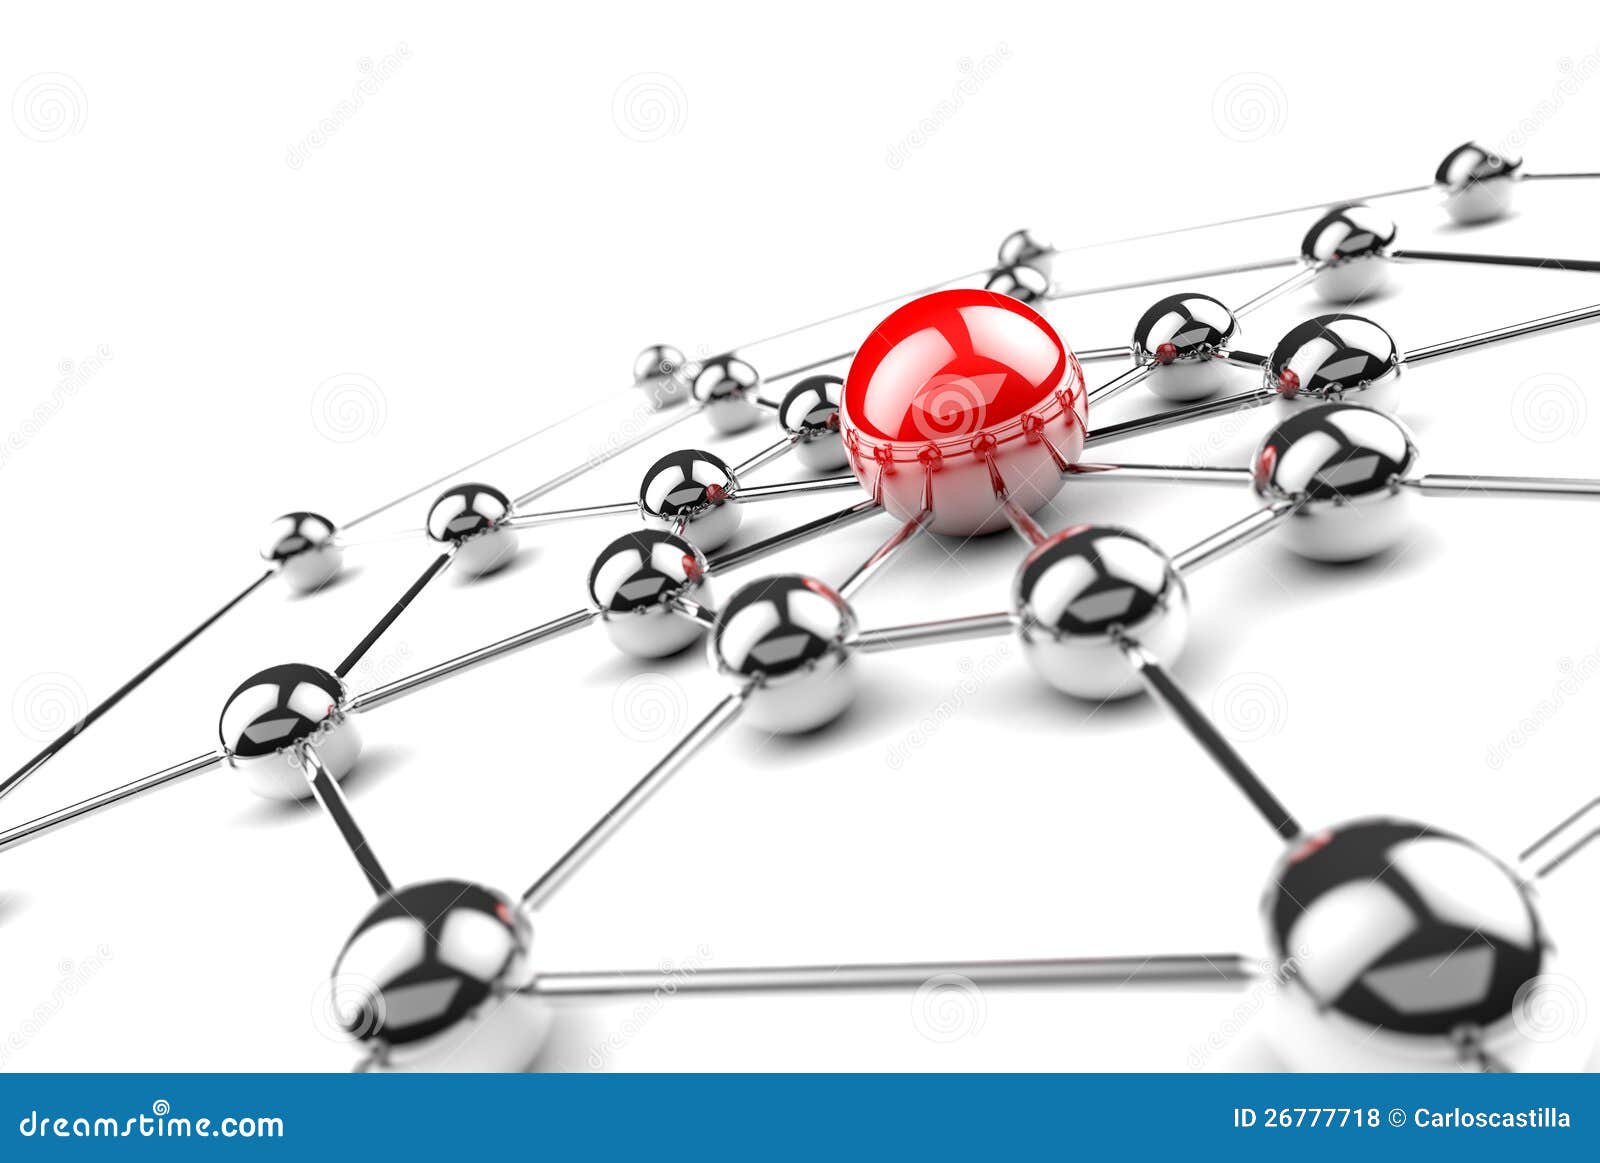 networking-concept-stock-illustration-illustration-of-business-26777718